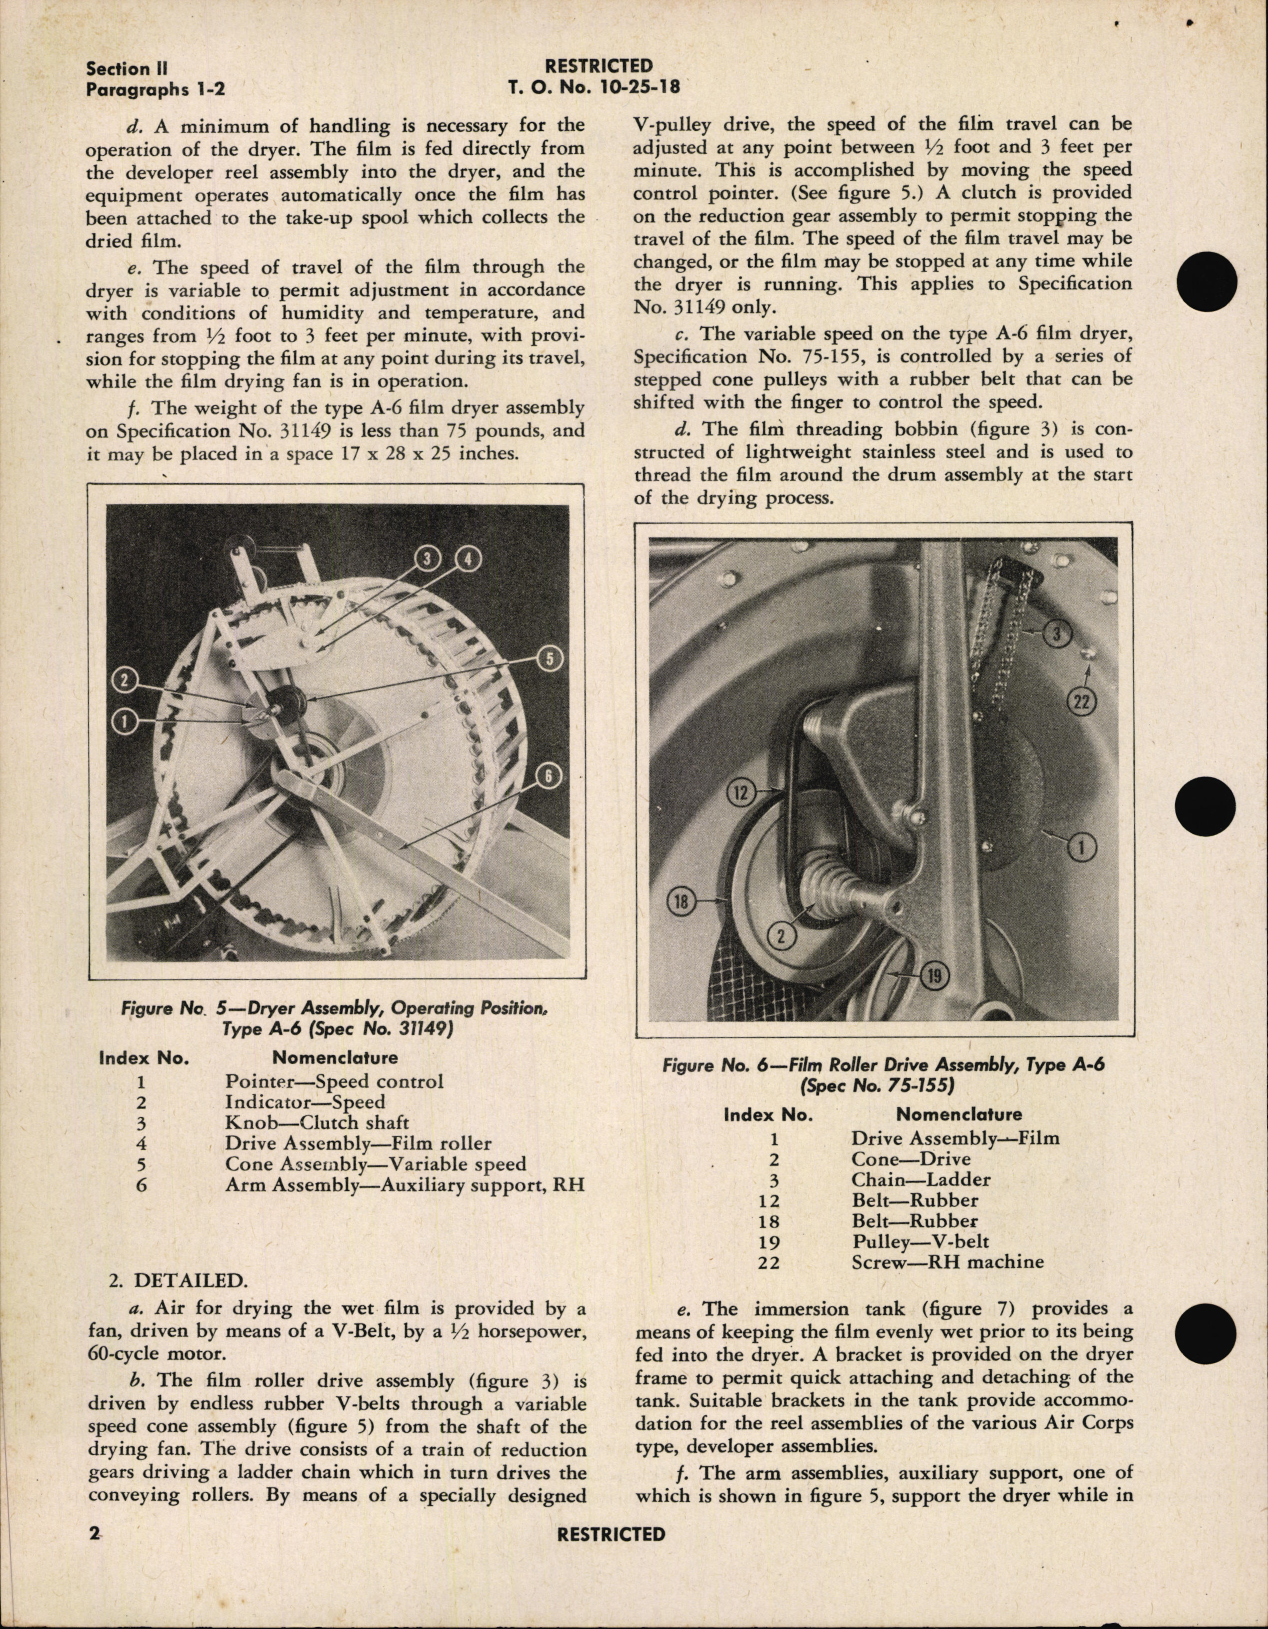 Sample page 6 from AirCorps Library document: Handbook of Instructions with Parts Catalog for Type A-6 Roll Film Dryer